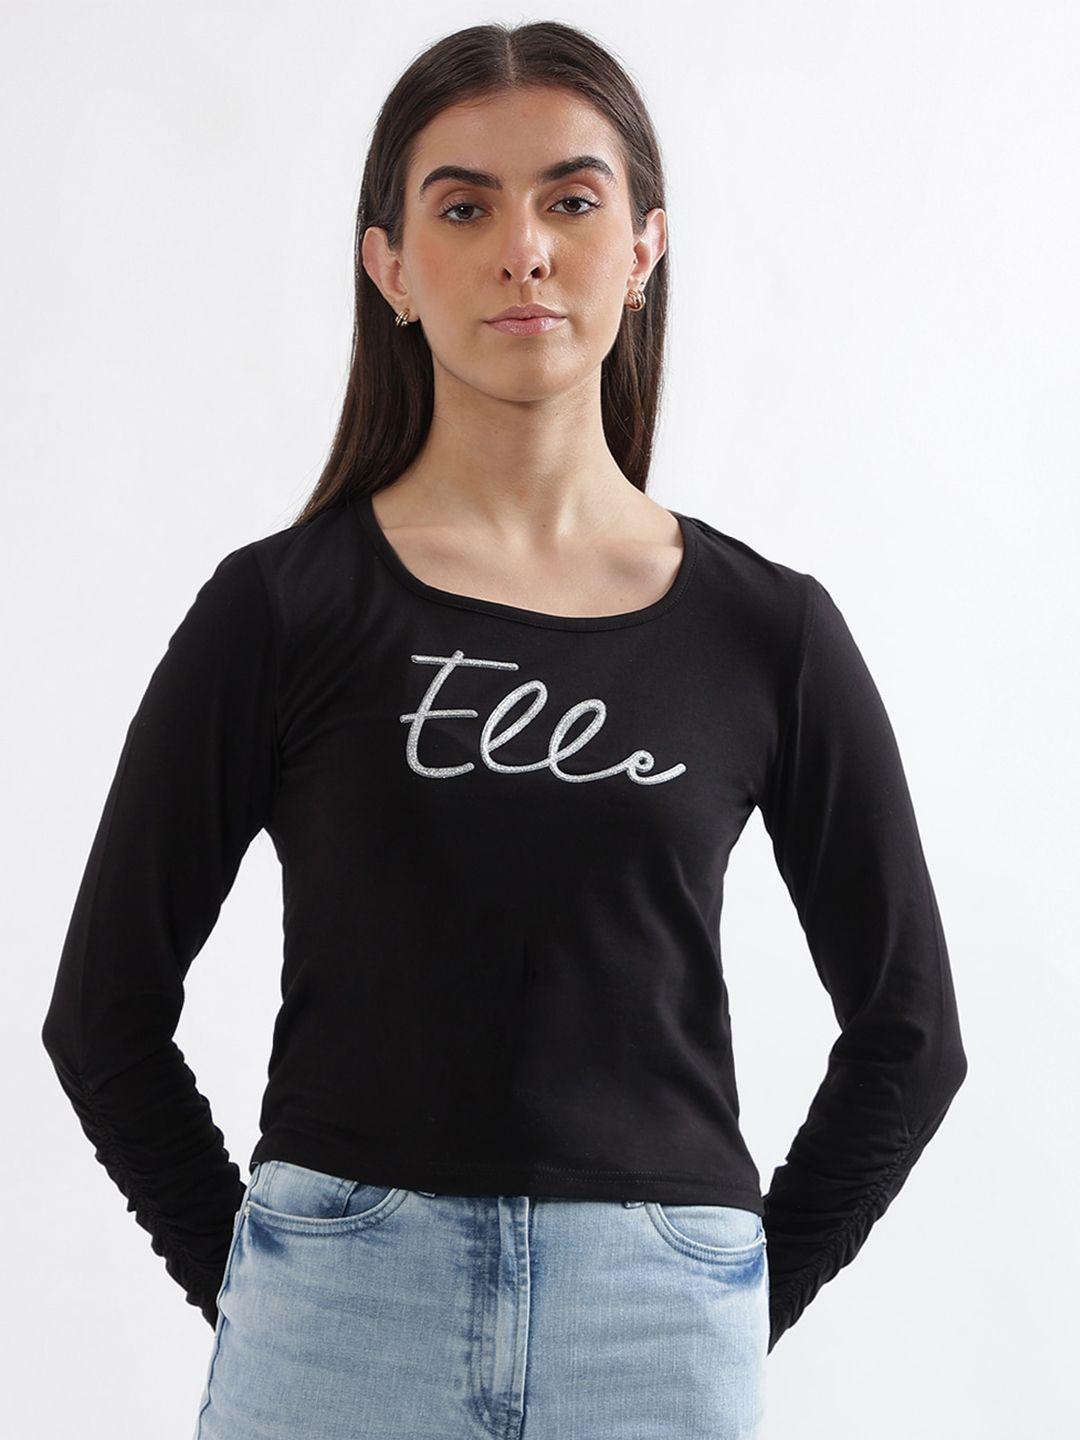 elle typography printed round neck fitted pure cotton top